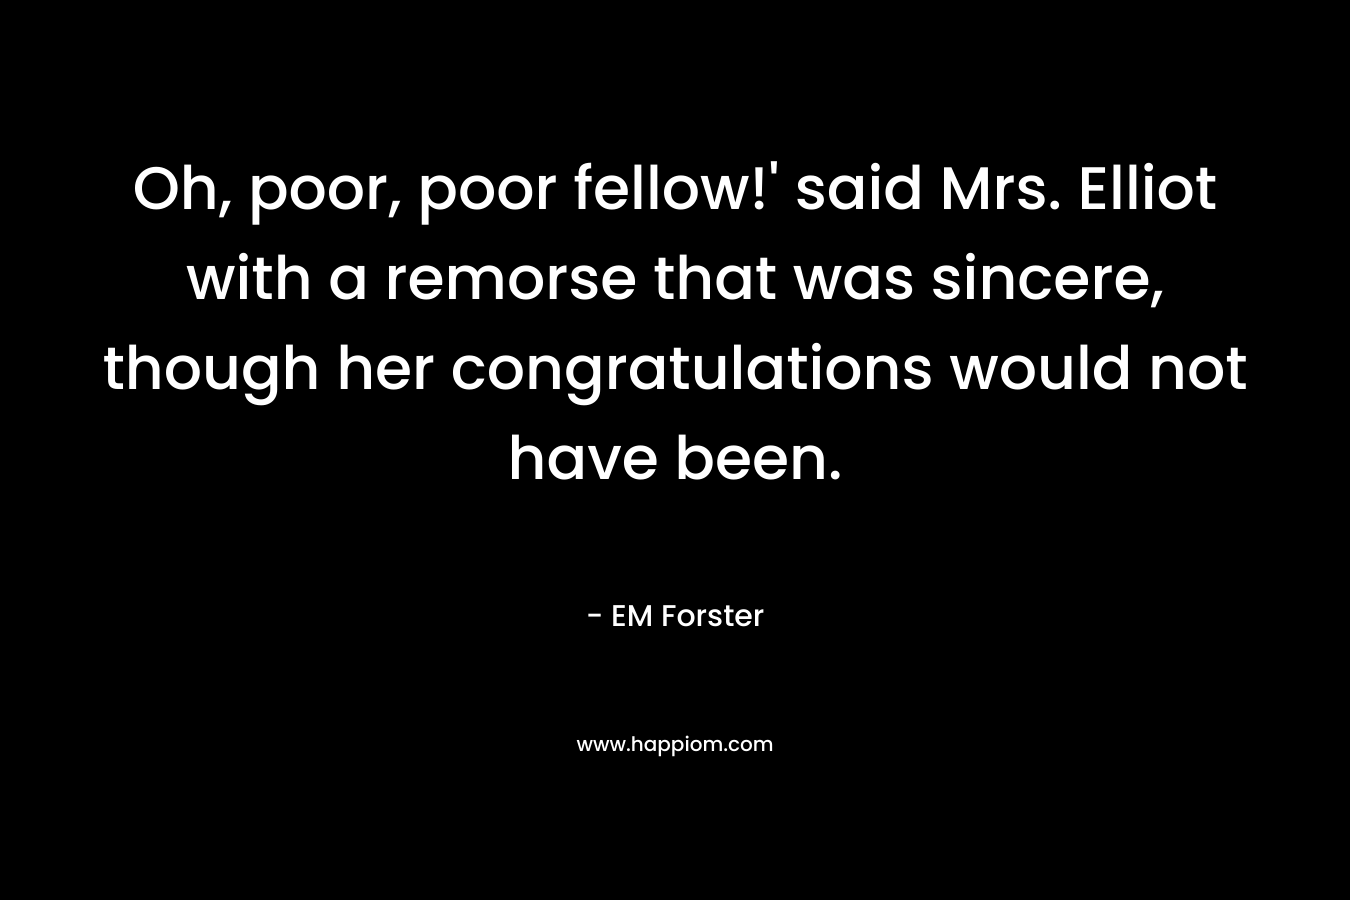 Oh, poor, poor fellow!’ said Mrs. Elliot with a remorse that was sincere, though her congratulations would not have been. – EM Forster